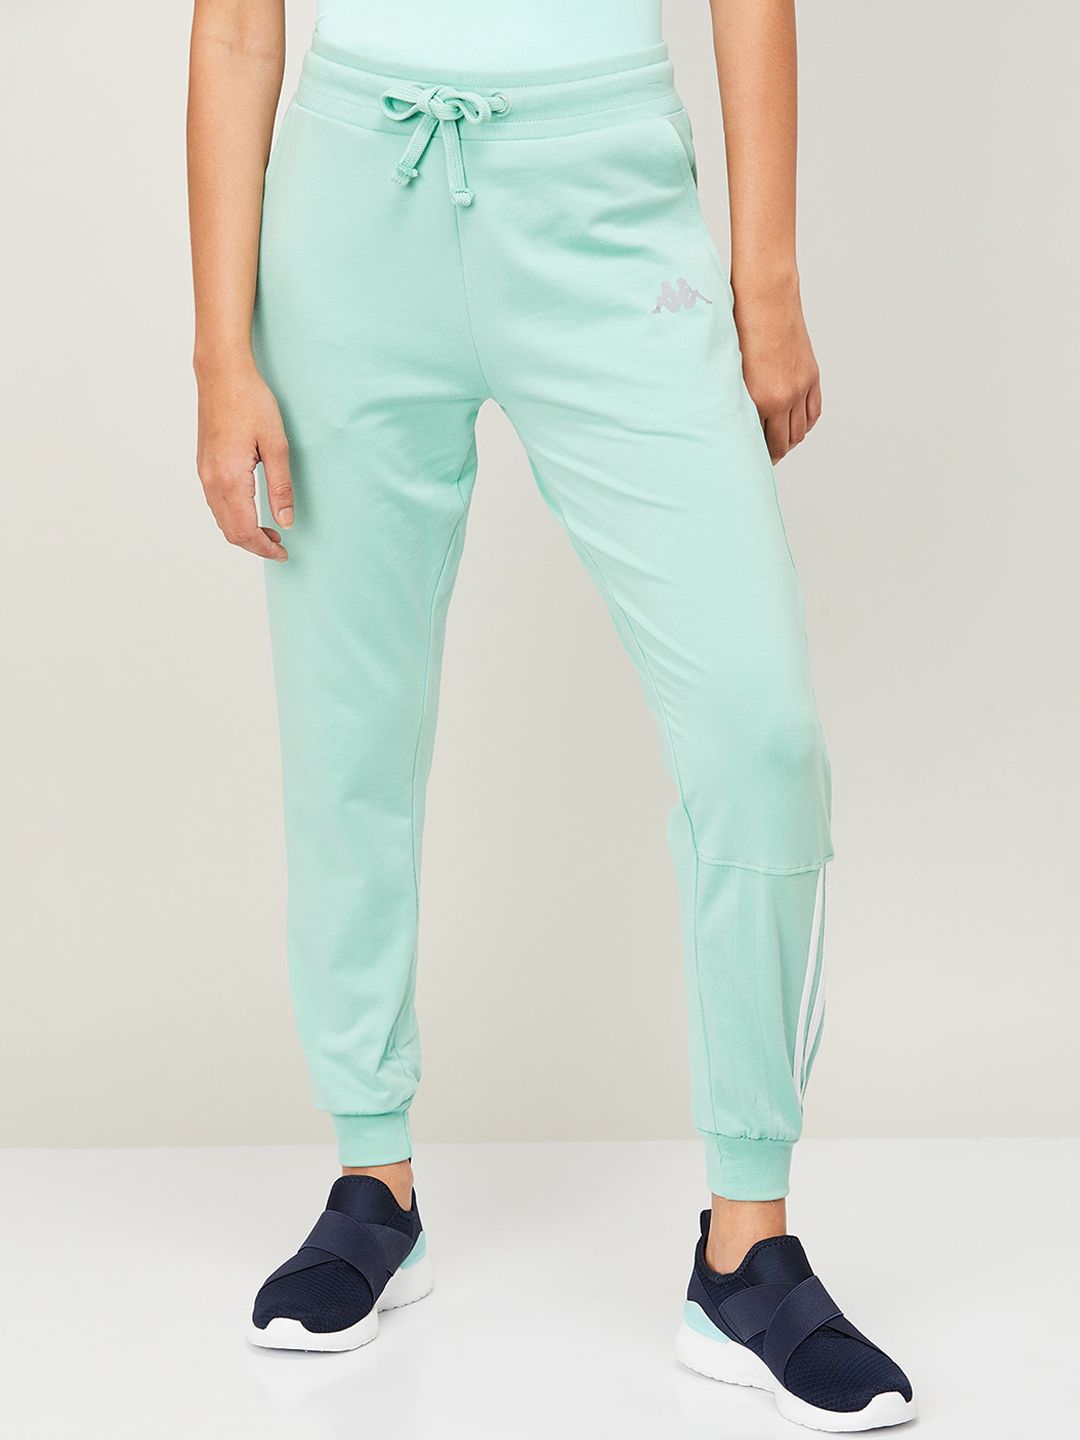 Kappa Women Green Solid Cotton Joggers Price in India